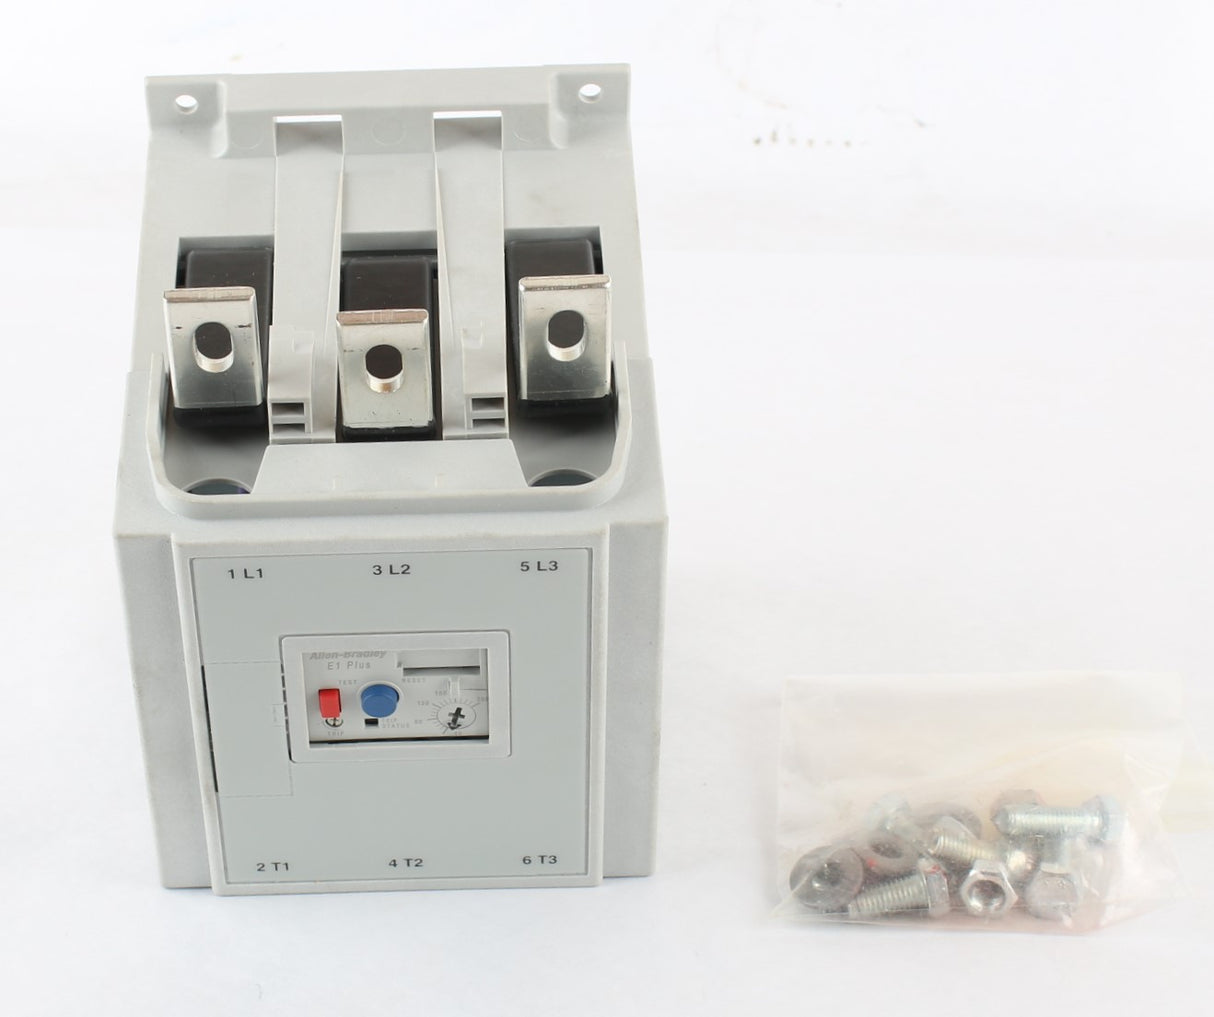 INGERSOLL RAND COMPRESSED AIR DIV ­-­ 22630974 ­-­ E1 PLUS 40-200 A IEC OVERLOAD RELAY